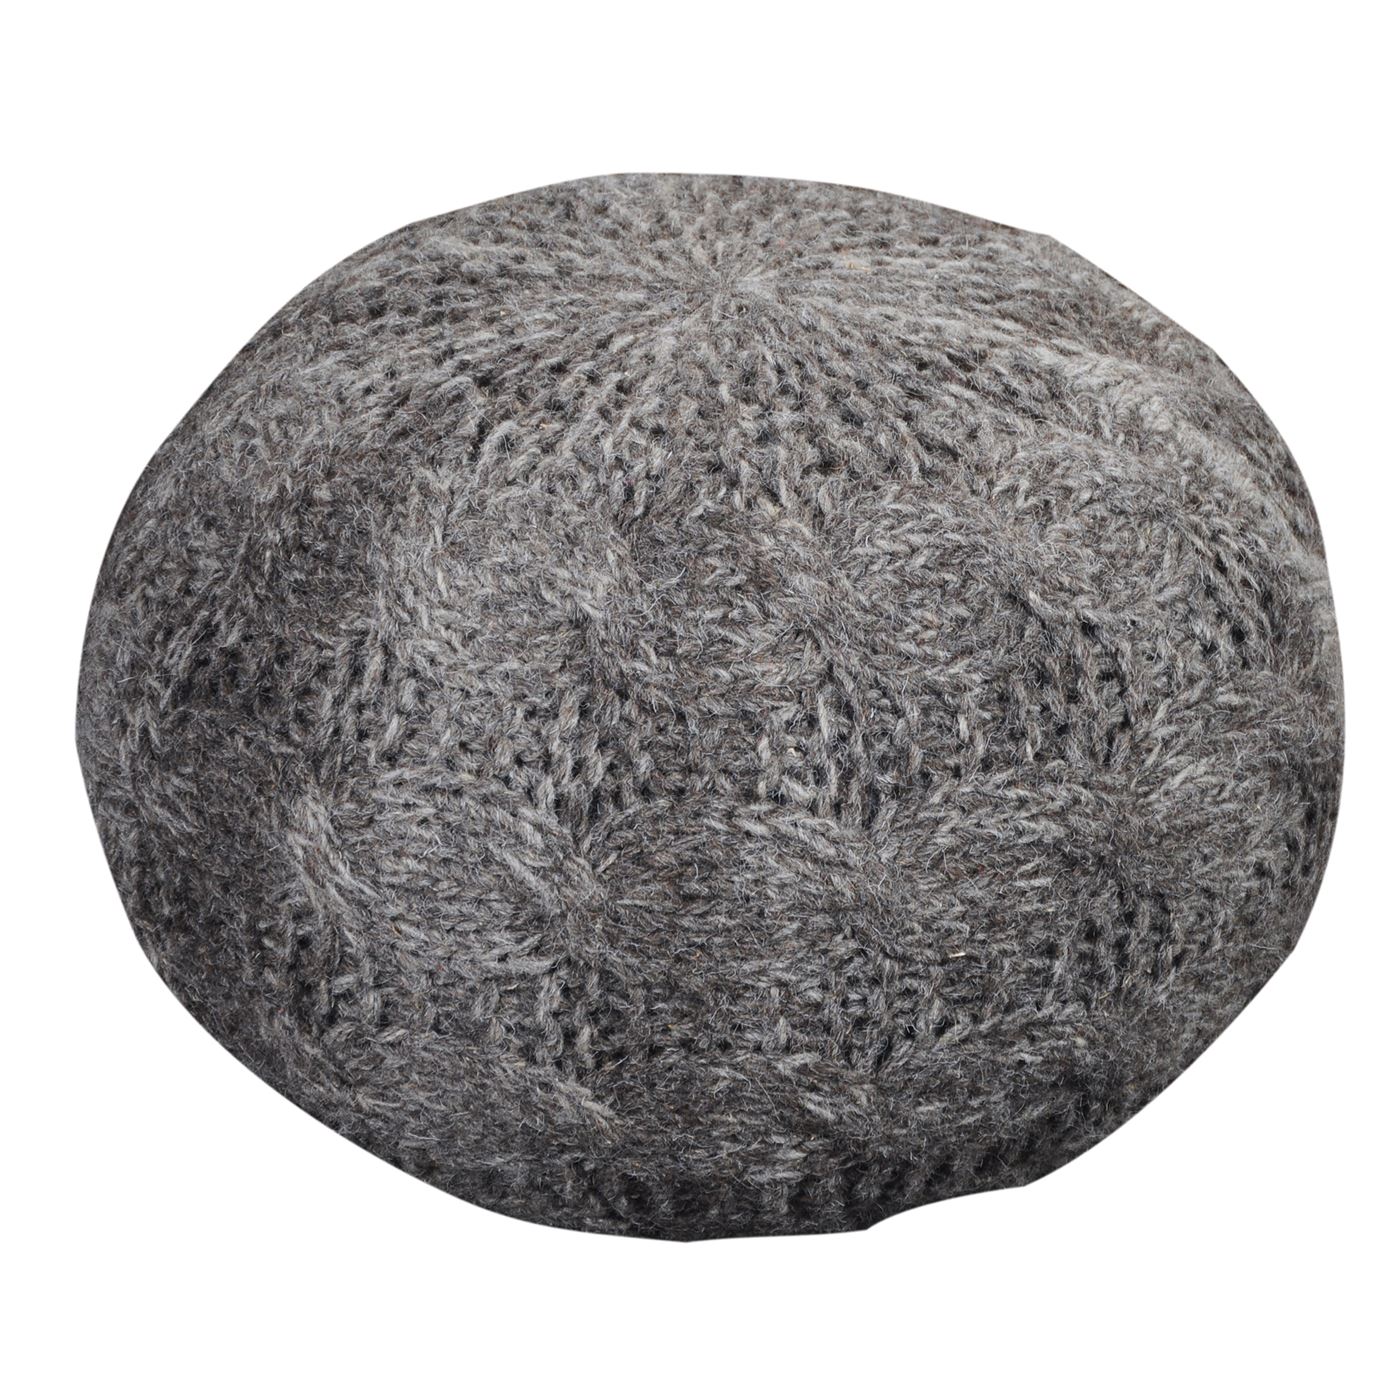 Oslo Round Pouf, Wool, Linen, Hm Knitted, Flat Weave 